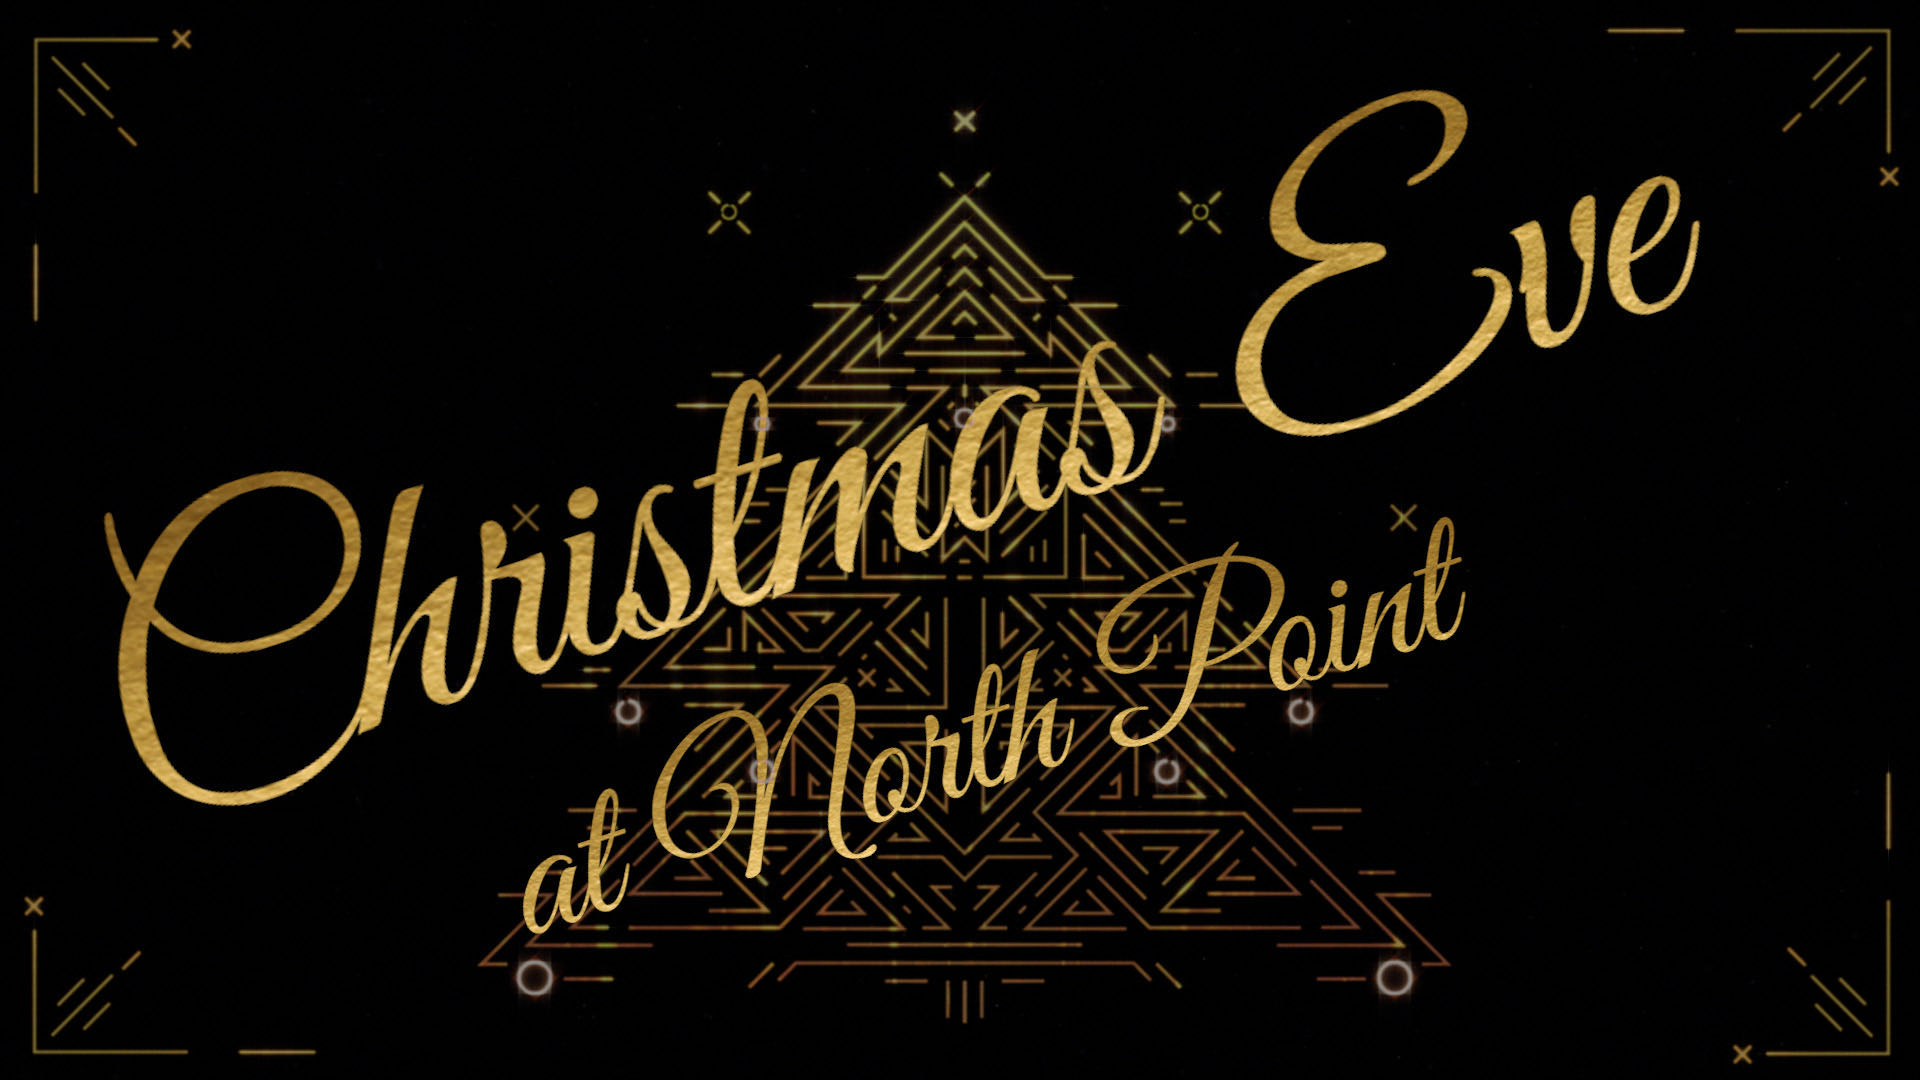 Christmas Eve at North Point